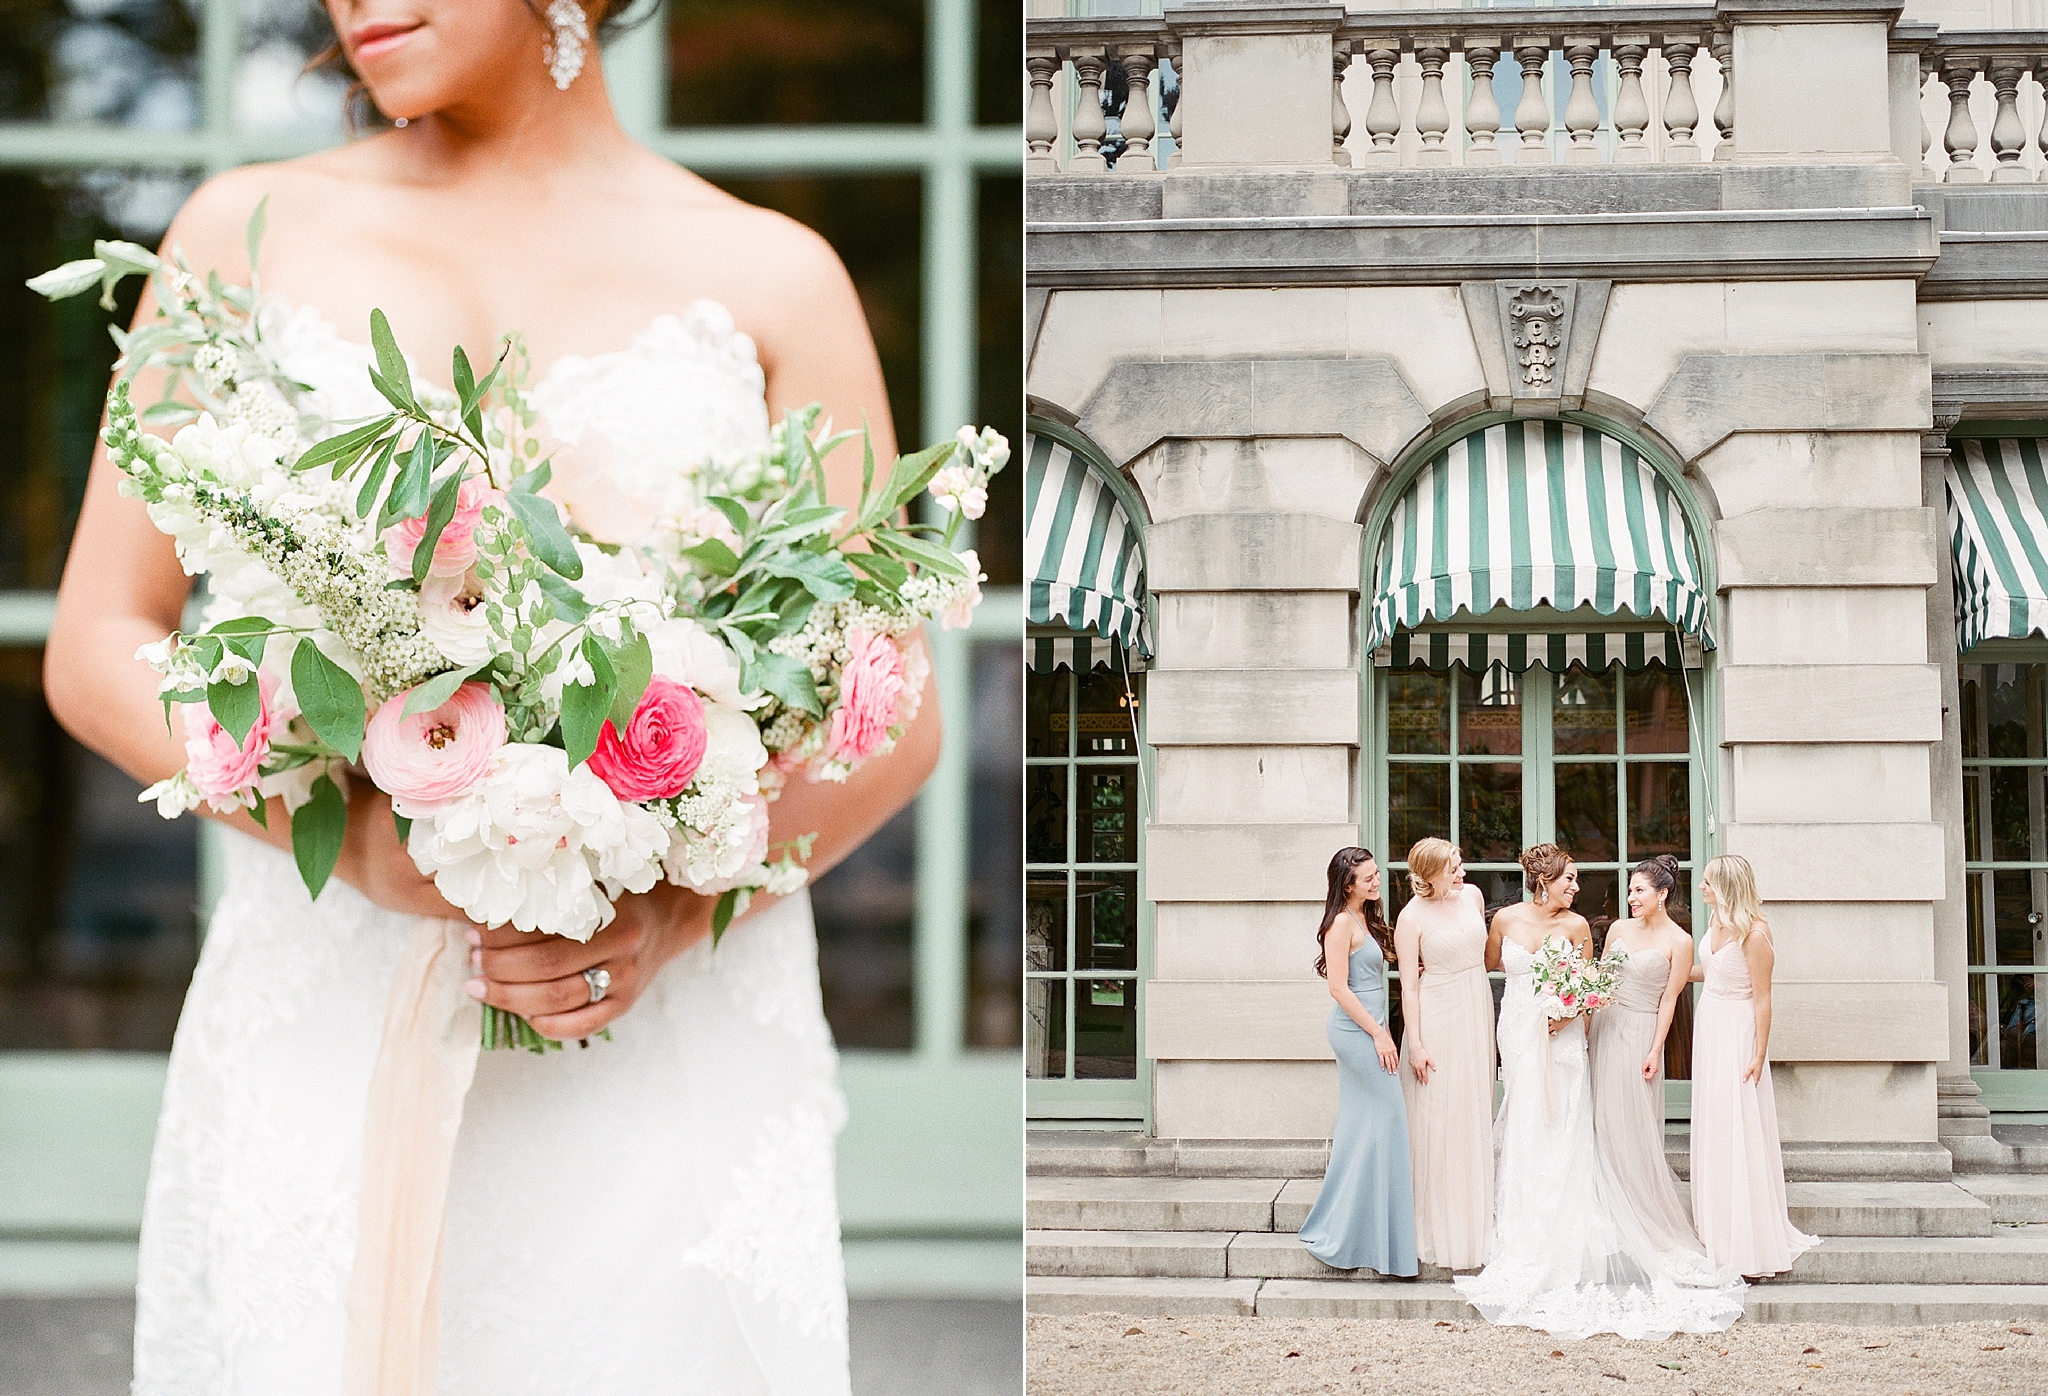 A romantic and elegant wedding at the Anderson House in The Society of the Cincinnati is photographed by Washington, DC film photographer, Alicia Lacey.